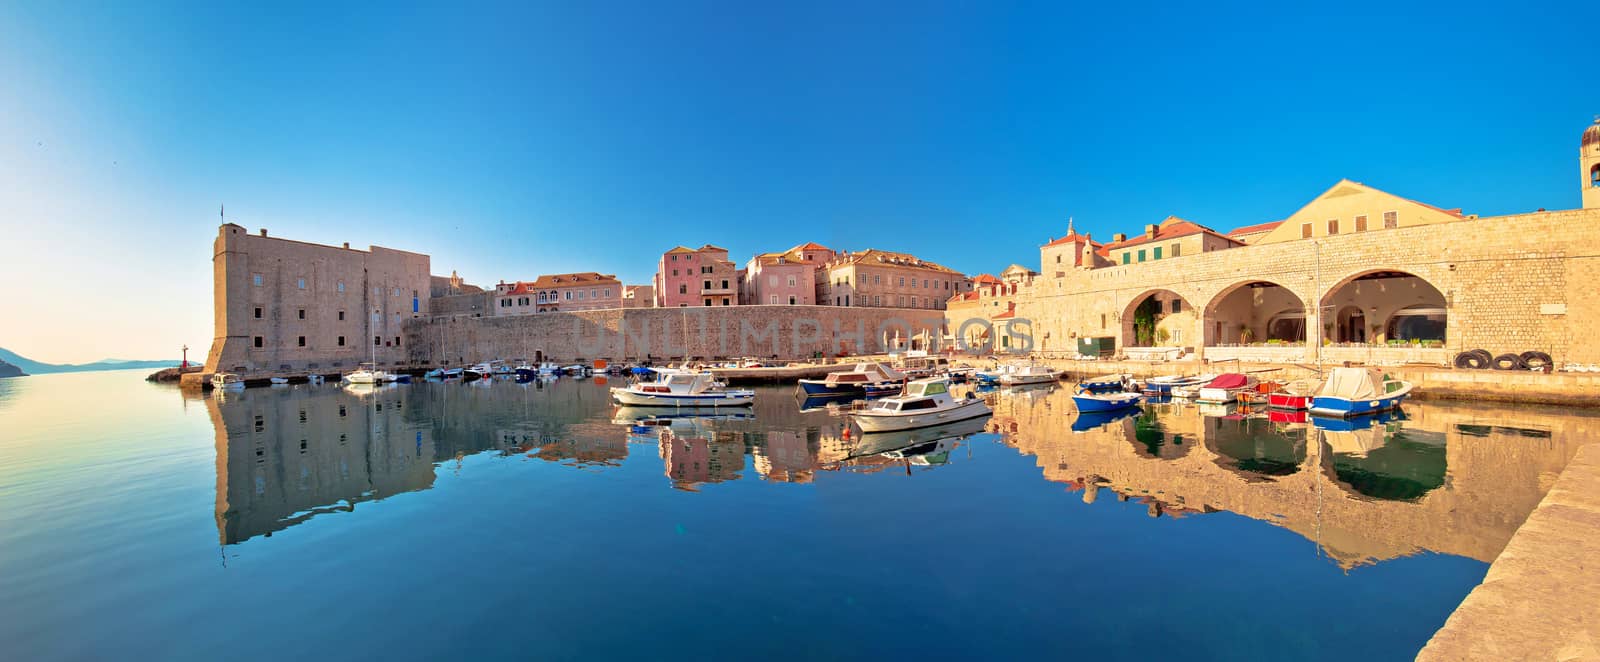 Dubrovnik harbor and city walls morning panoramic view by xbrchx